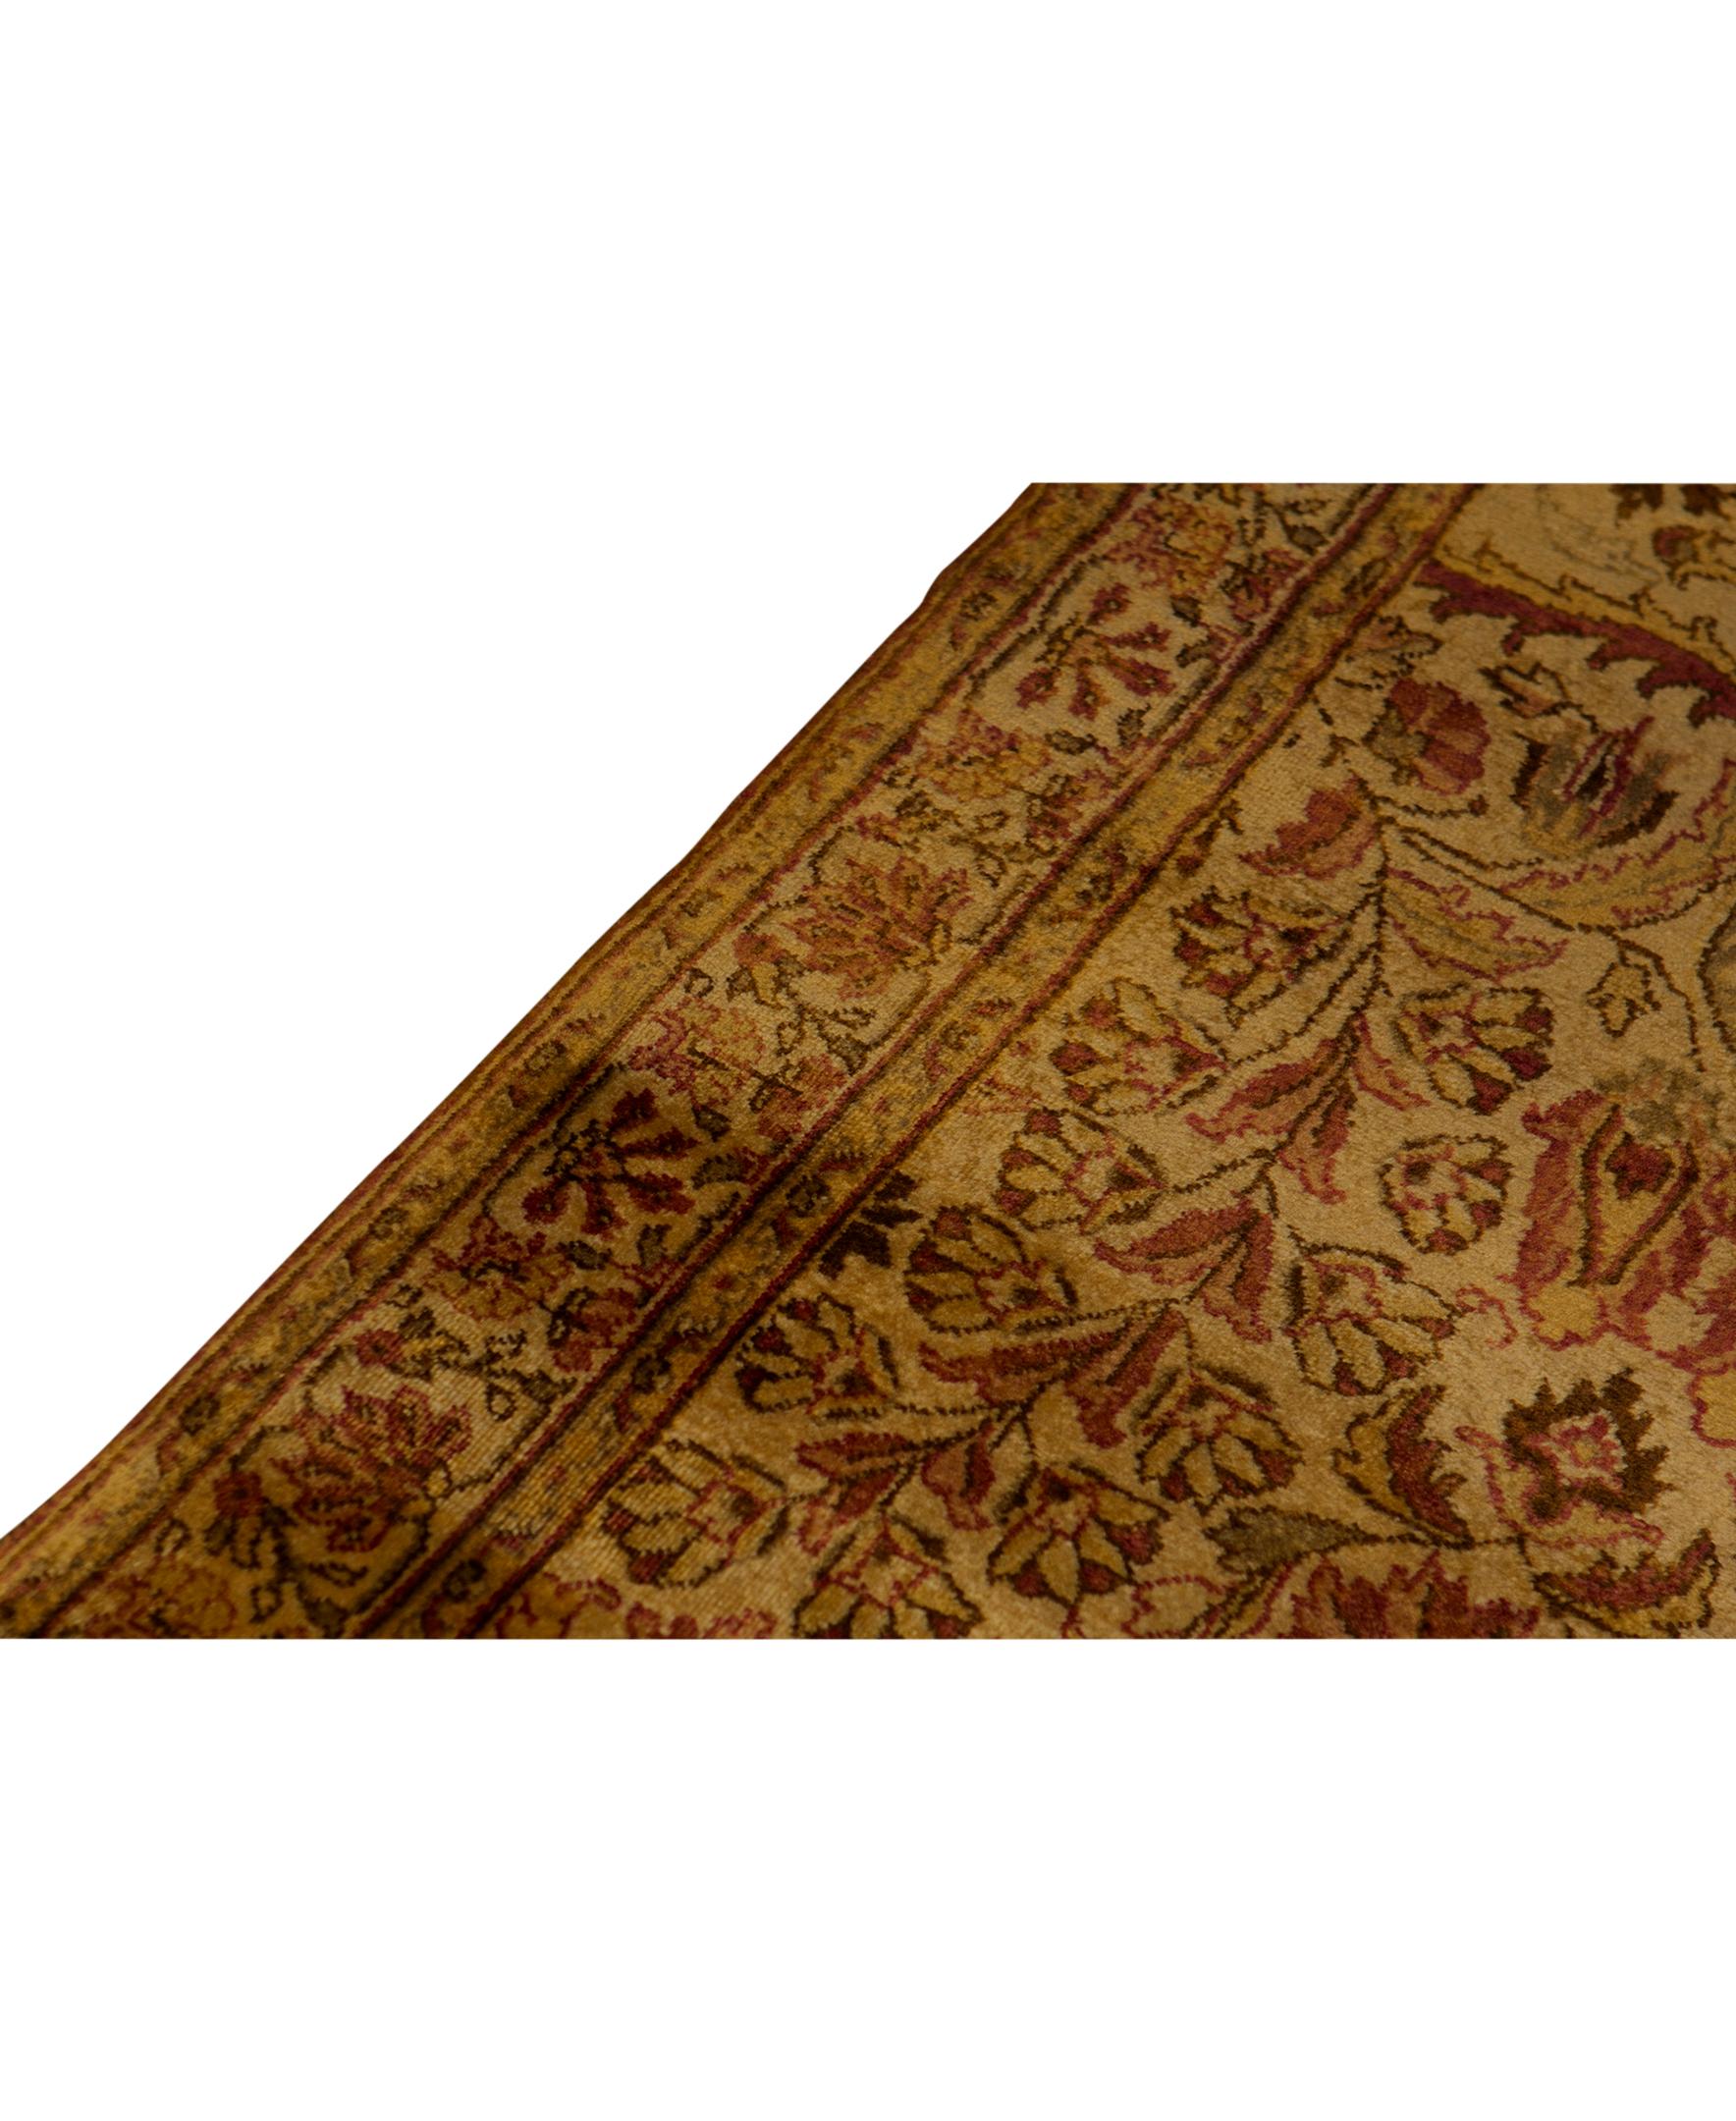   Antique Persian Fine Traditional Handwoven Luxury Wool Beige Rug. Size: 2'-6